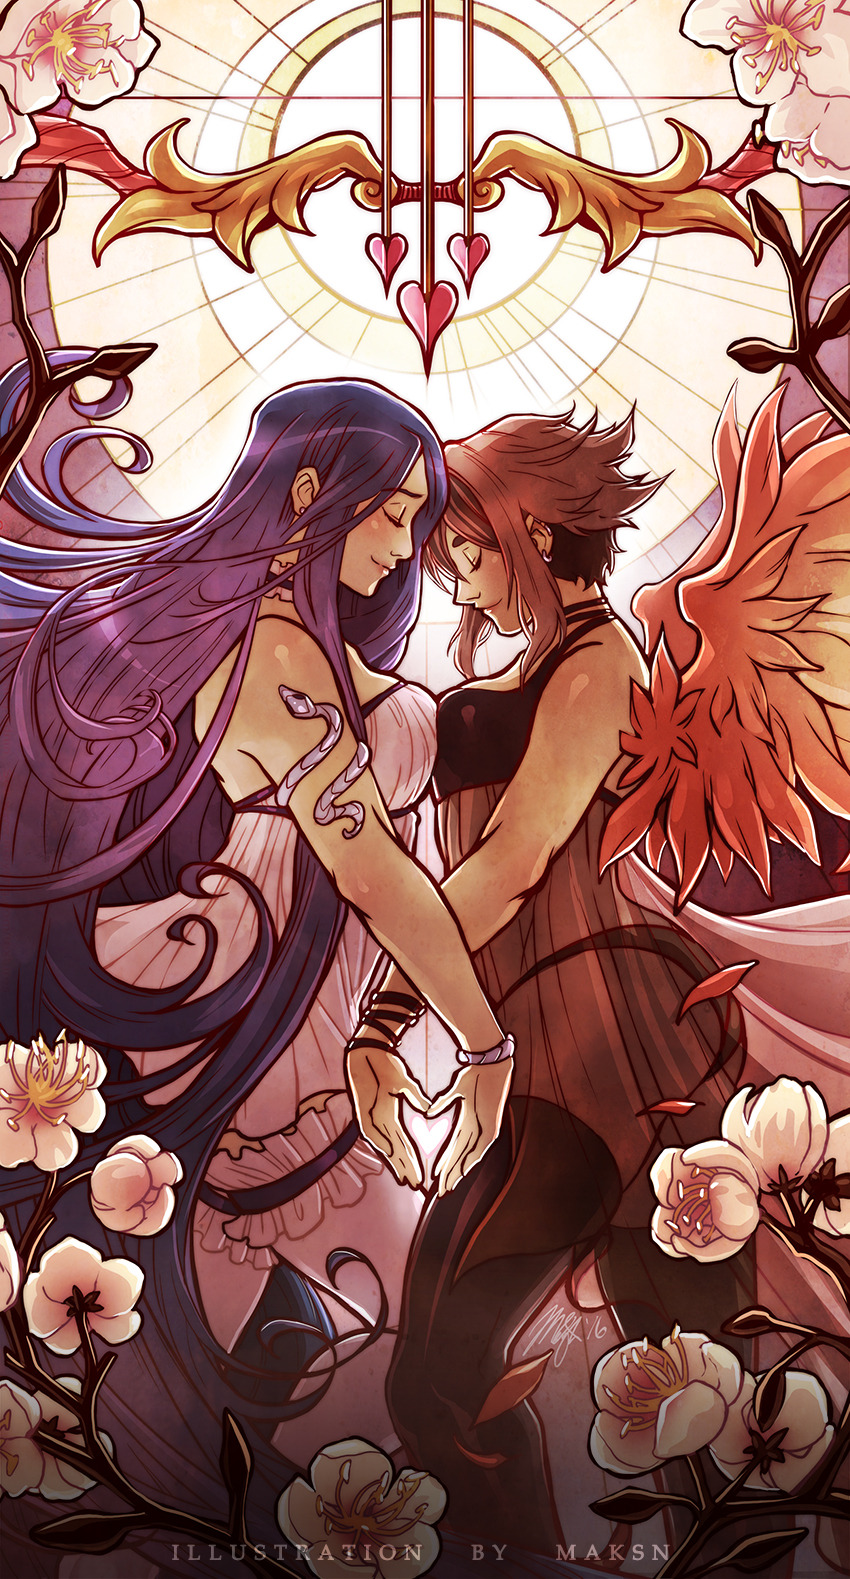 razygurr: A tarot illustration of The Lovers, featuring my 2 lovely characters from